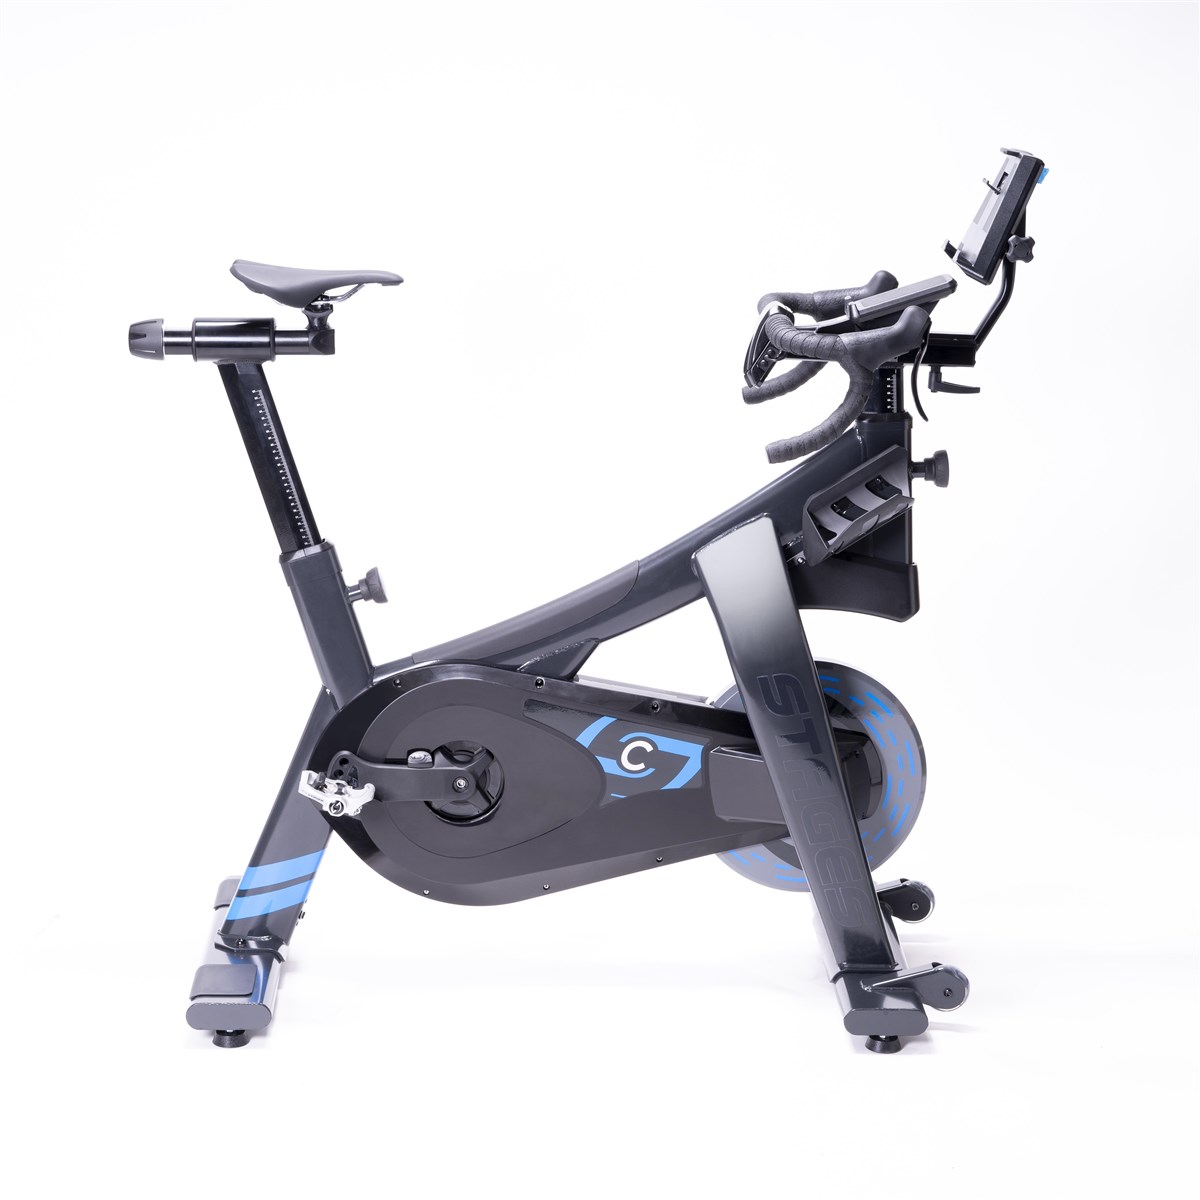 Stages Cycling Smart Bike Trainer product image